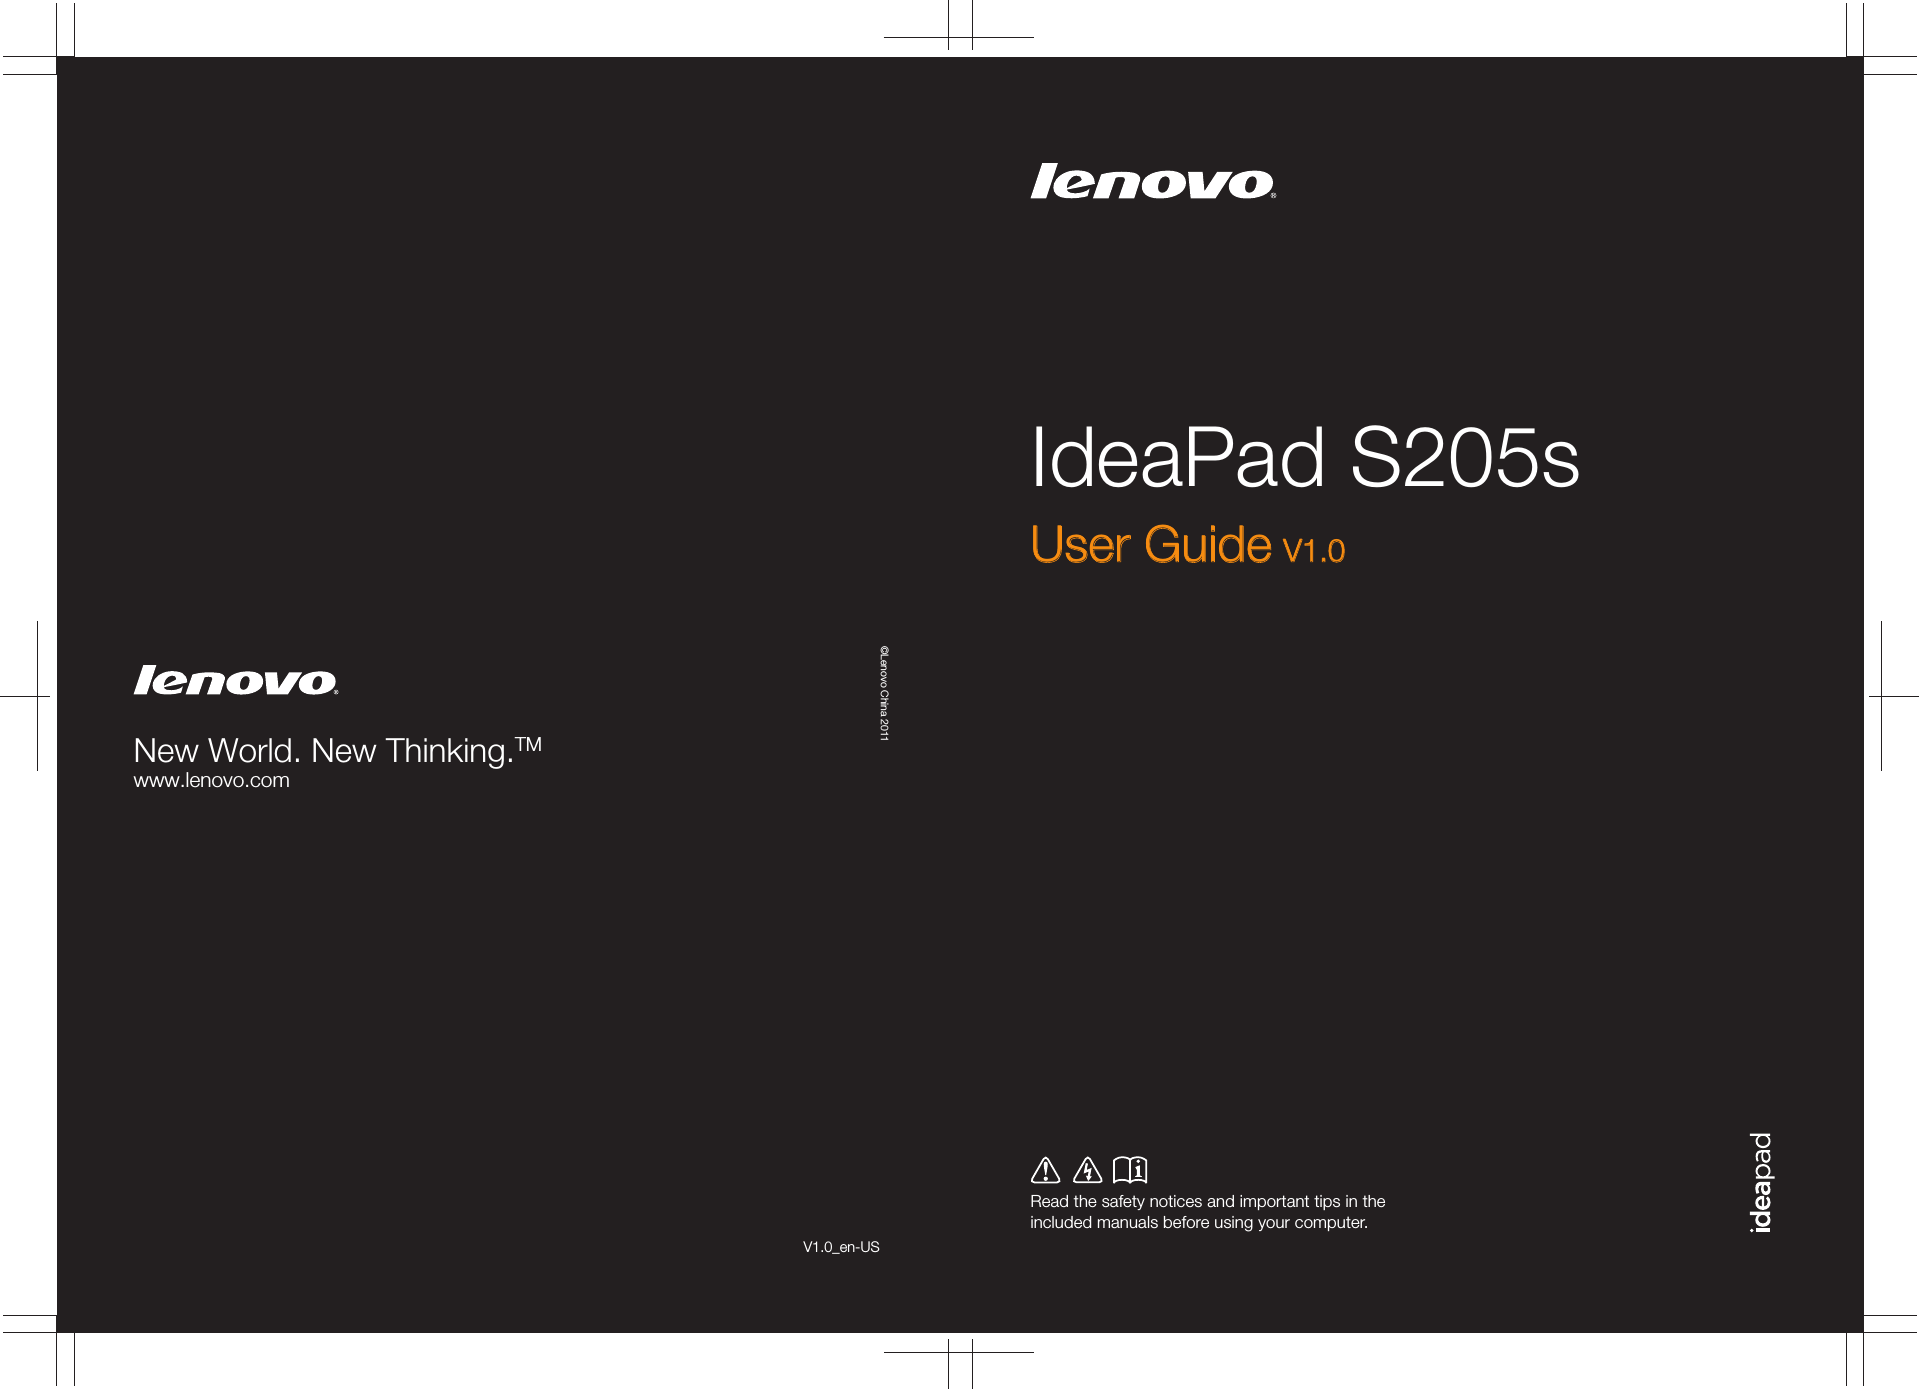 IdeaPad S205sRead the safety notices and important tips in the included manuals before using your computer.©Lenovo China 2011New World. New Thinking.TMwww.lenovo.comUser GuideUser Guide V1.0V1.0V1.0_en-US